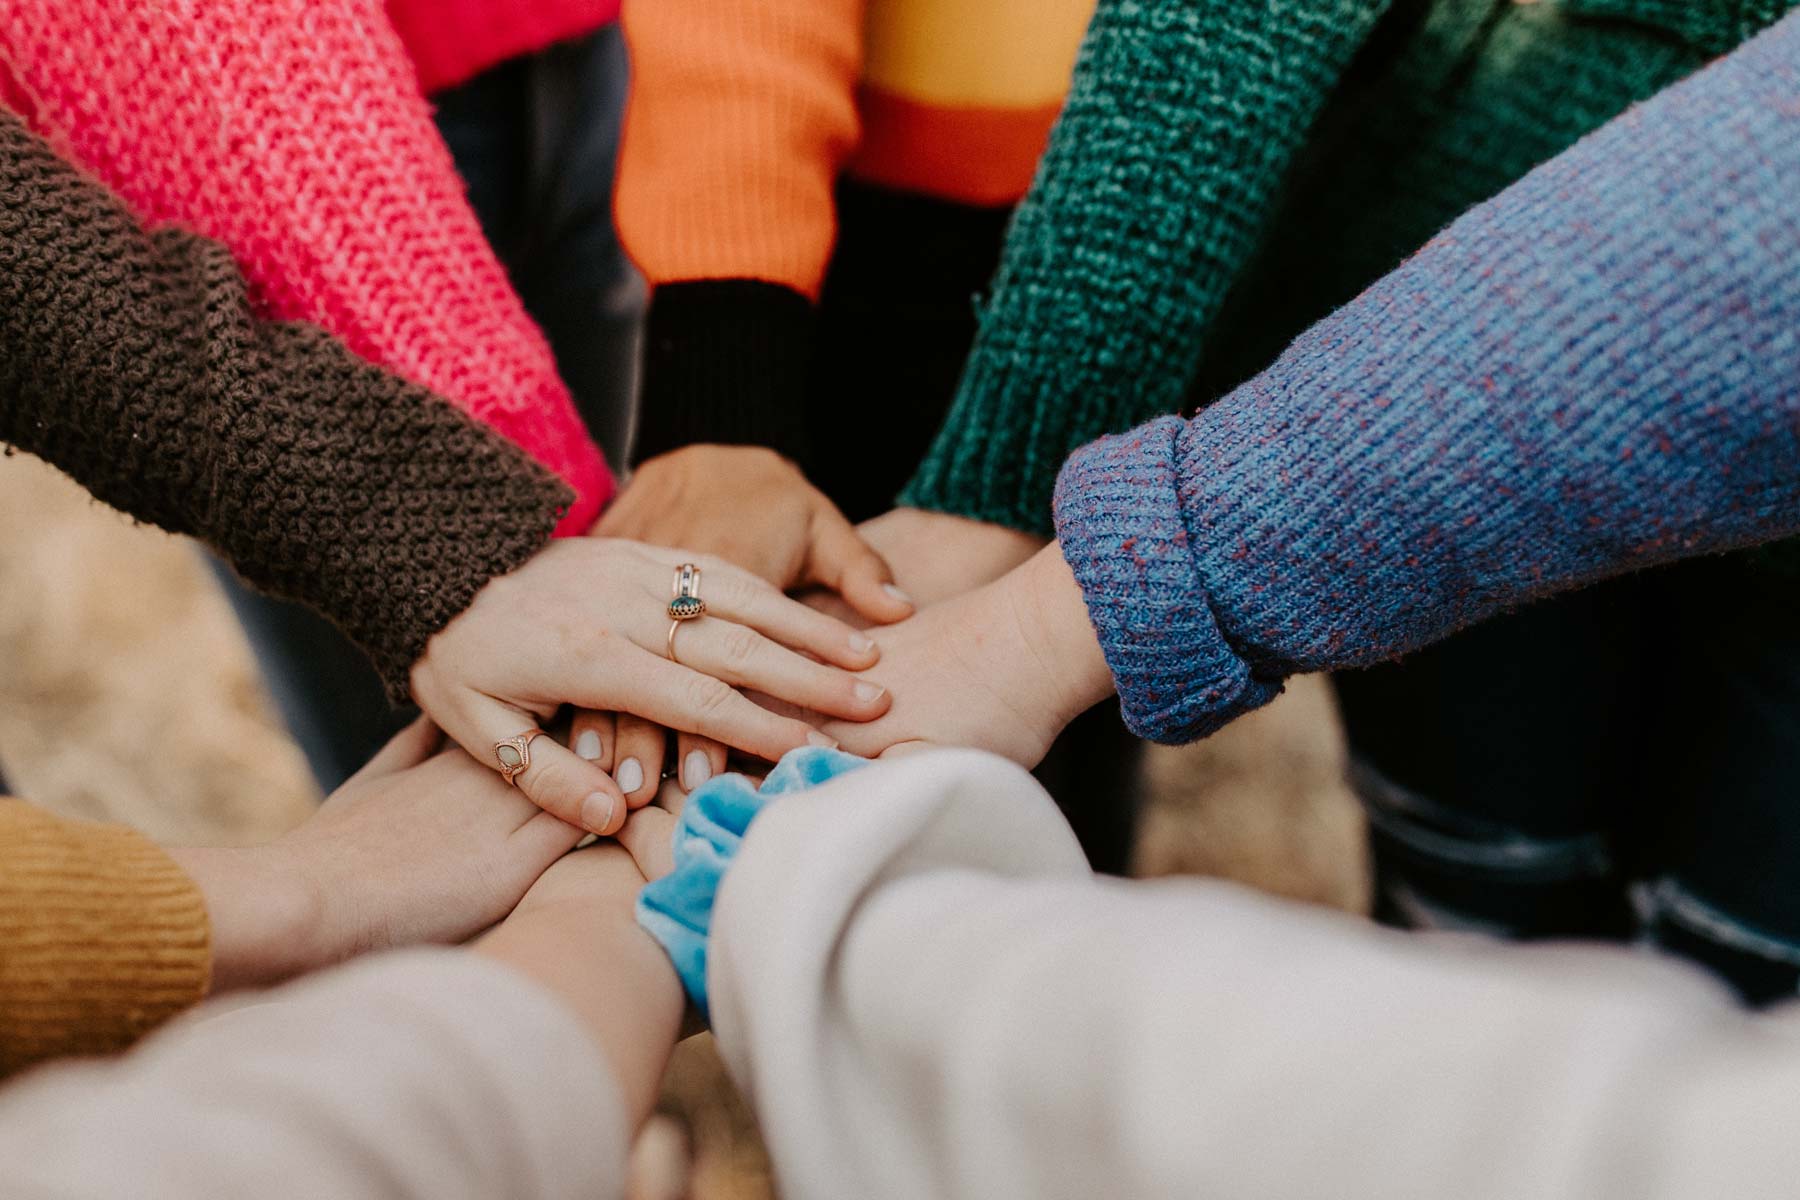 A team of people piles their hands together, wearing differently colored sweaters